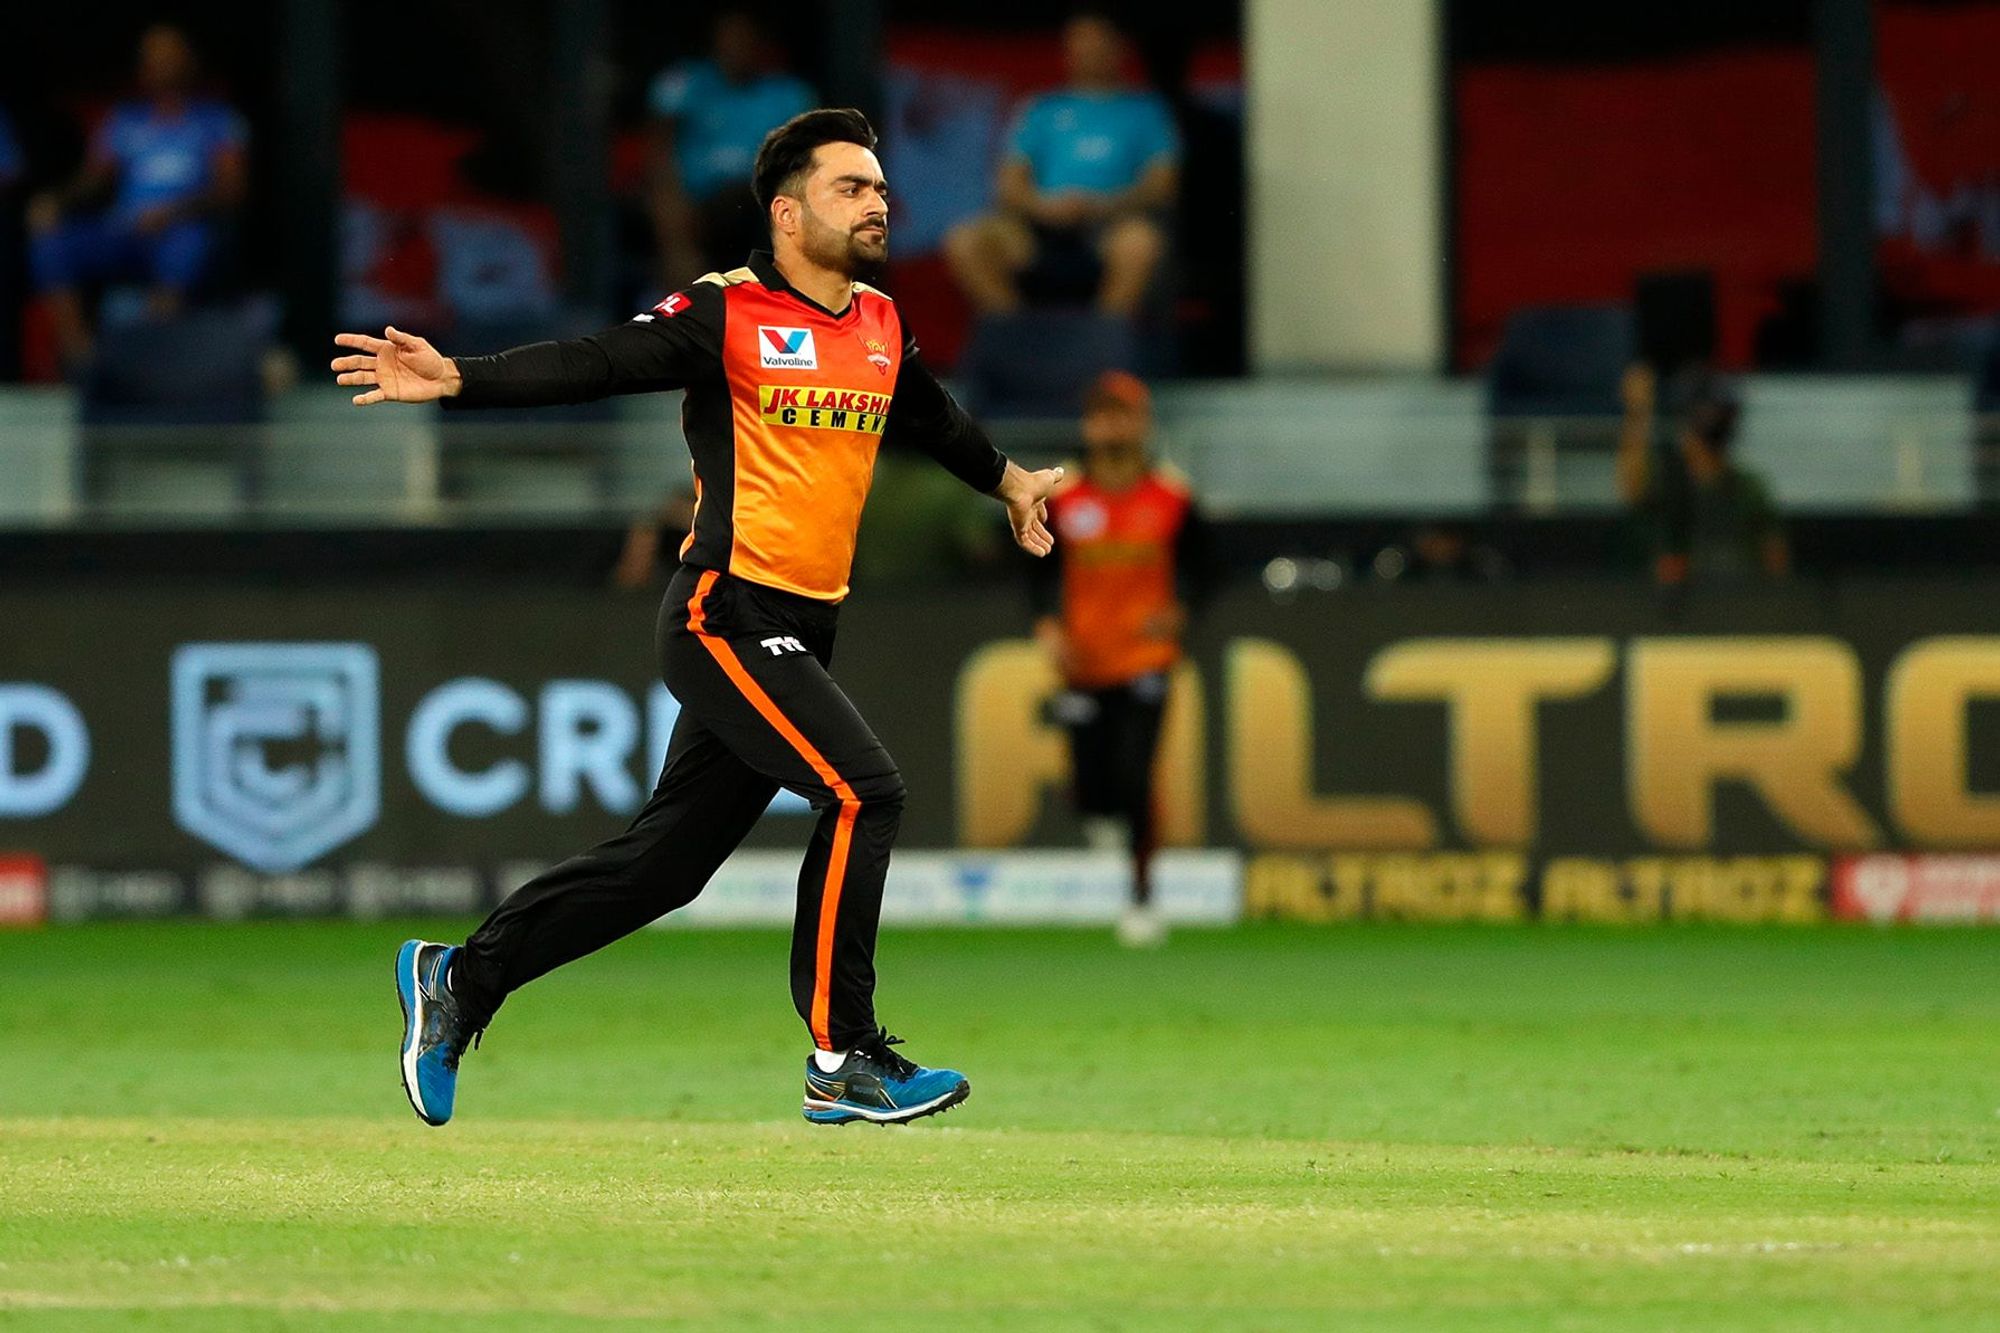 IPL 2020 | Shaun Pollock includes Rashid Khan, Archer and Bumrah in ‘Top 5 bowlers’ list for the season